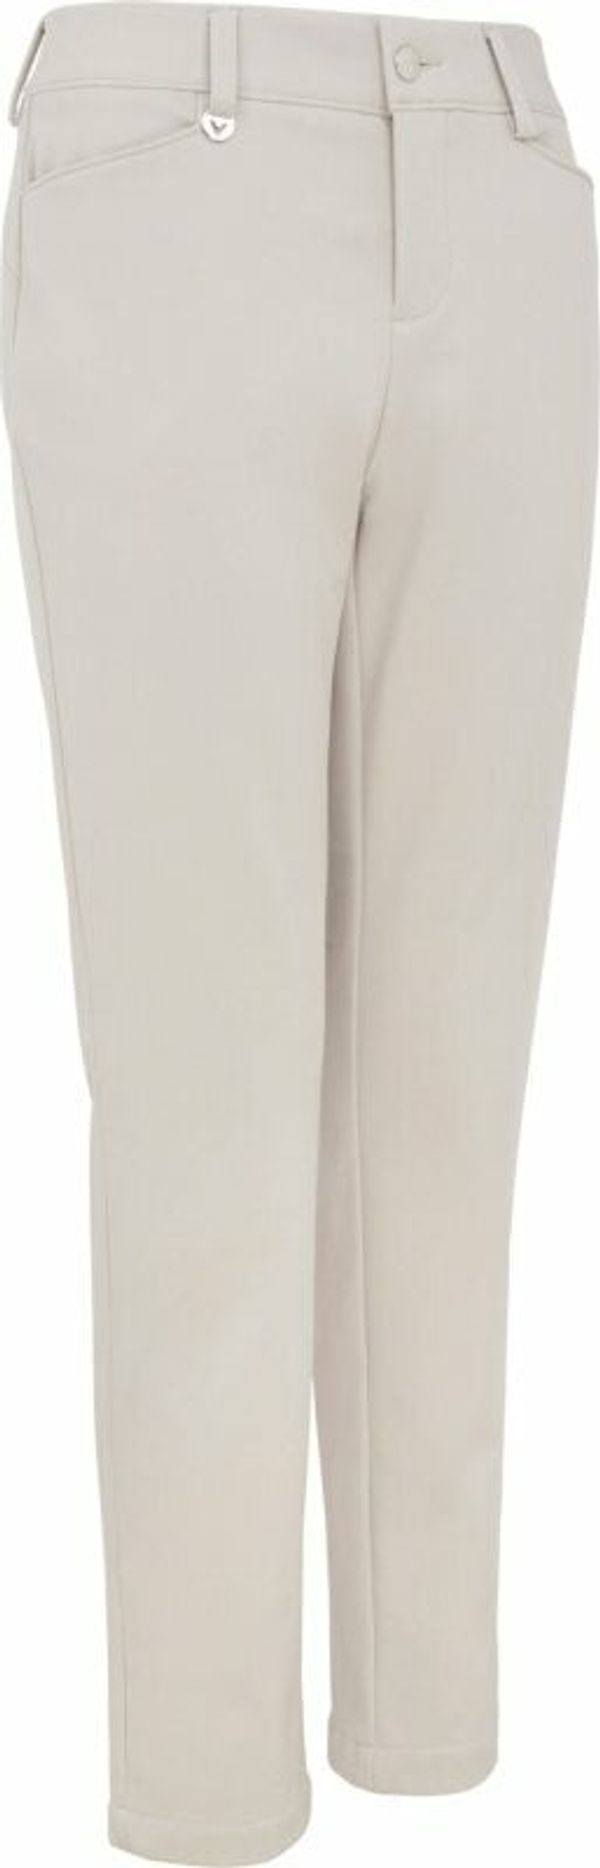 Callaway Callaway Thermal Womens Trousers Chateau Gray 6/29